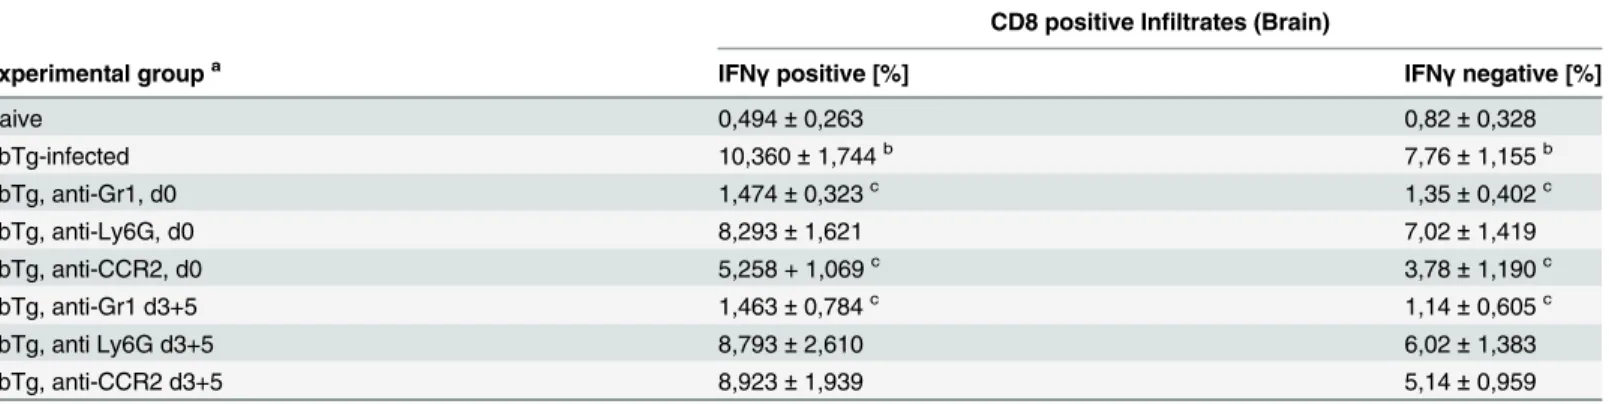 Table 1. Impact of mononuclear cell subset depletion on IFNγ producing CD8 + T cells (brain infiltrates).